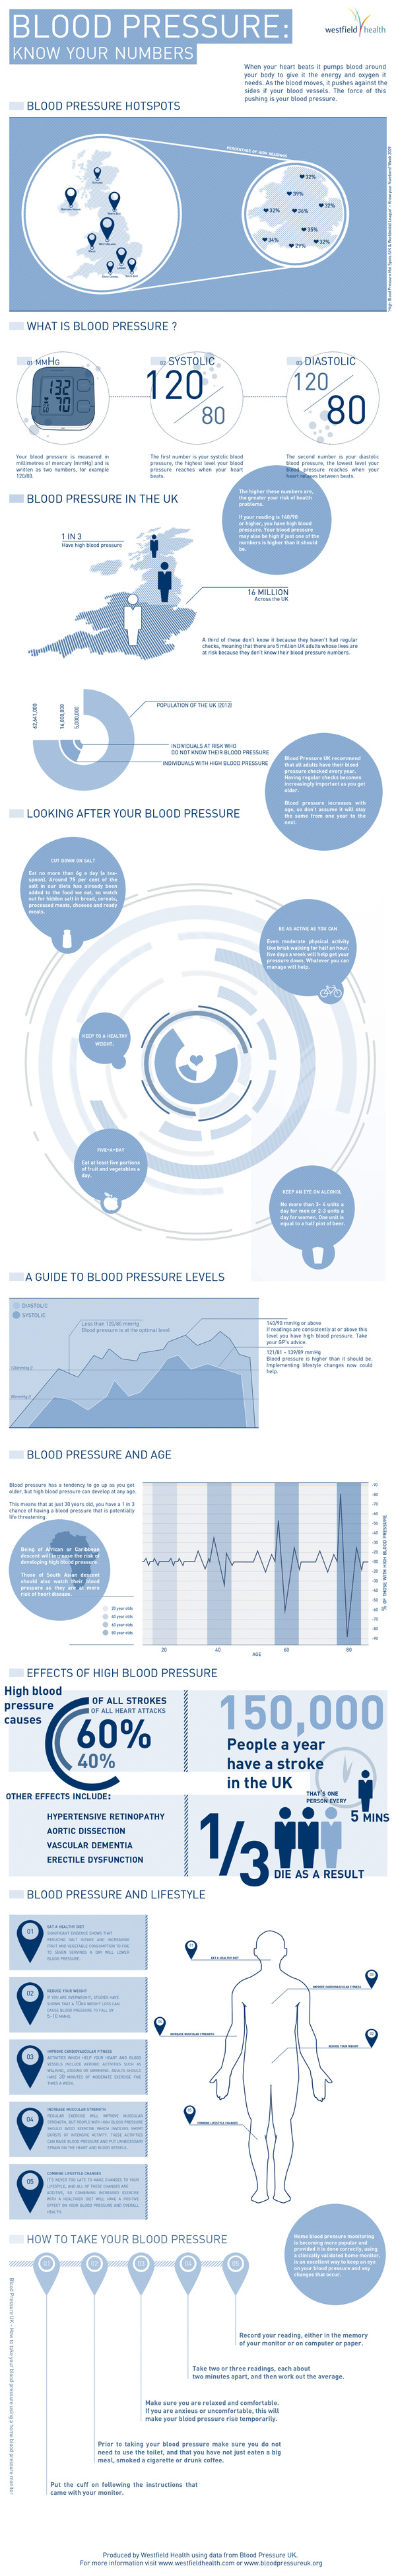 Blood Pressure: Know Your Numbers infographic